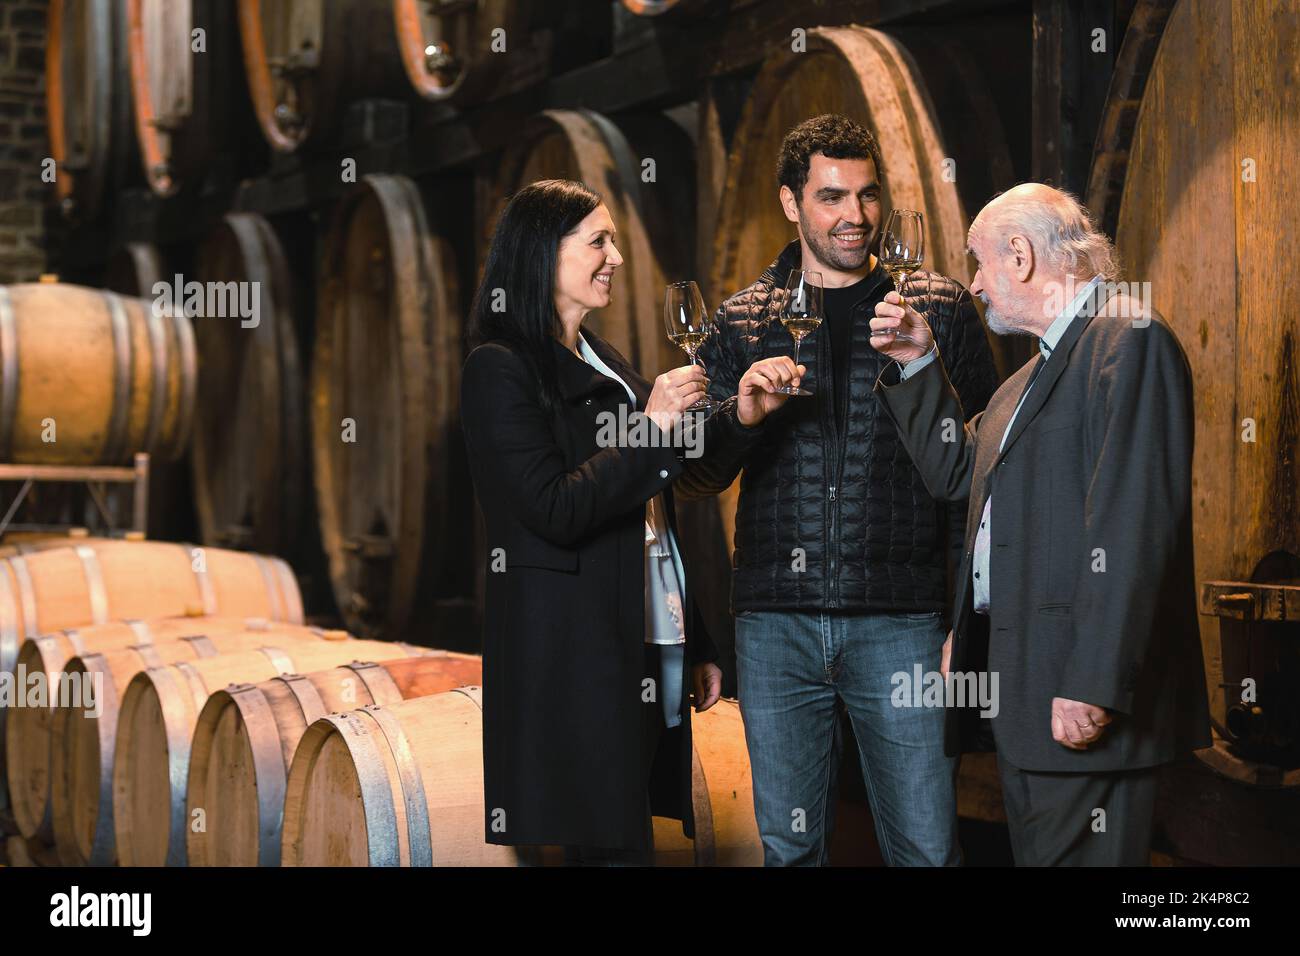 Wine cellar guests, one woman and two men tasting a white wine produced and aged by an old traditions in oak barrels Stock Photo